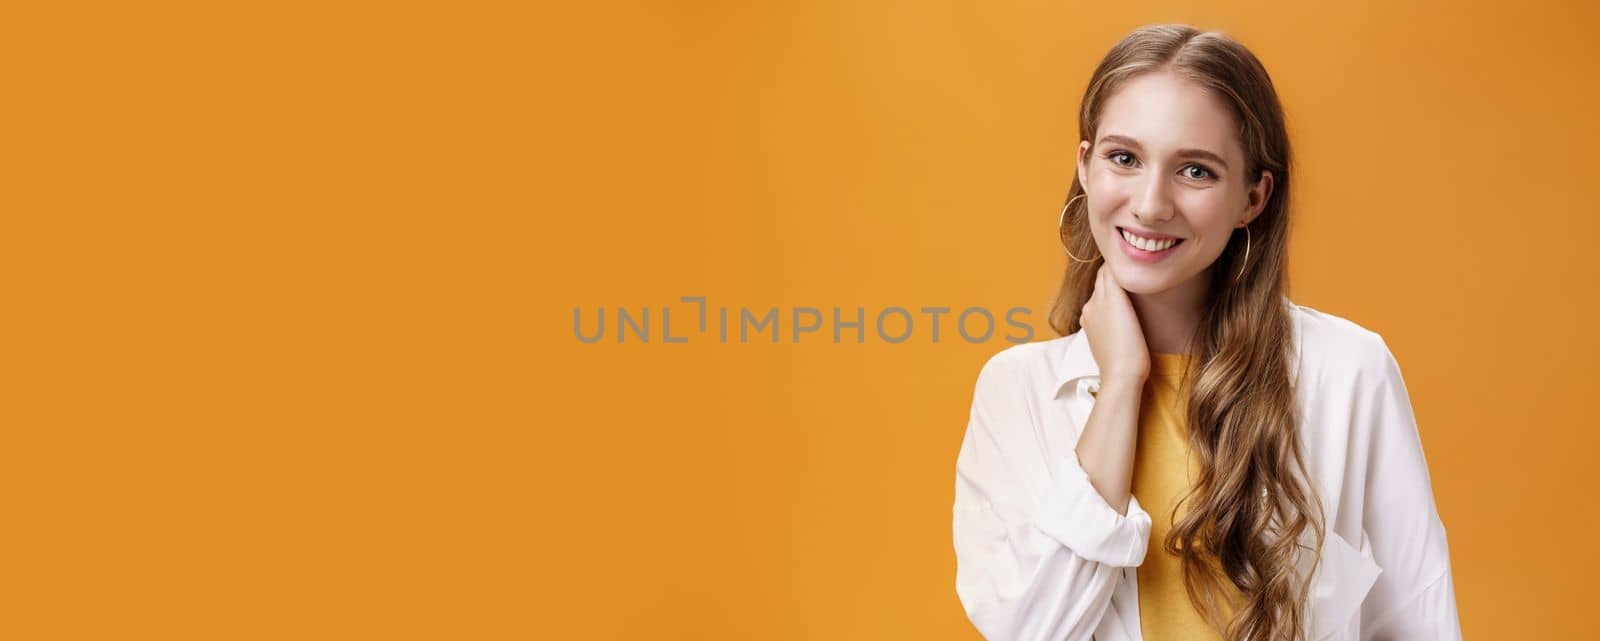 Lifestyle. Close-up shot of glamourous young tender girlfriend dressed on date touching neck shy and silly smiling joyfully at camera blushing feeling gentle over orange background in cool outfit.